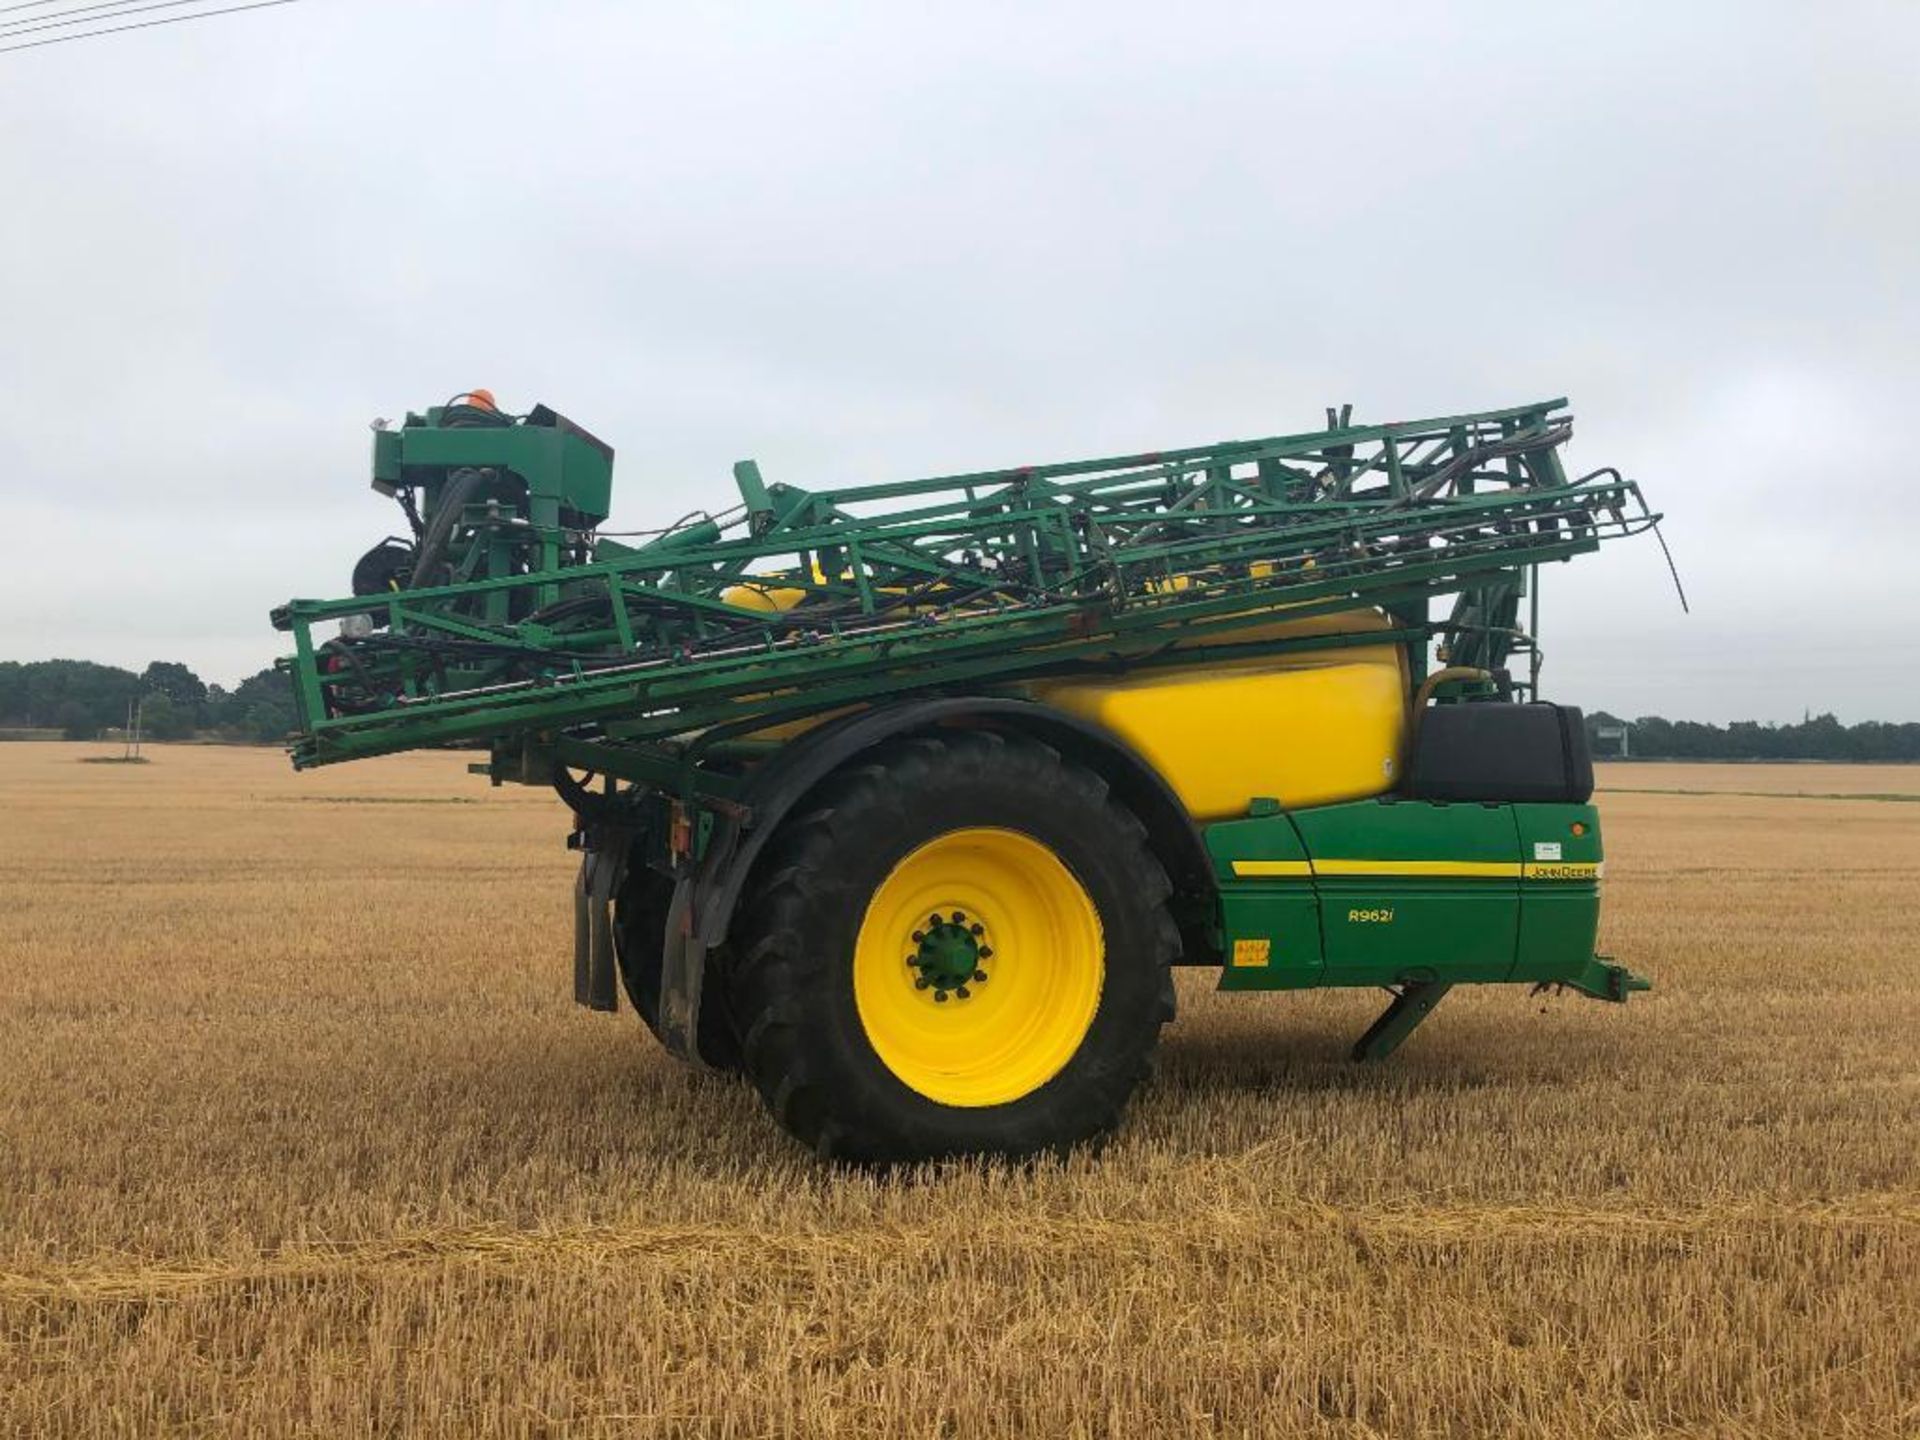 2012 John Deere R962i 36m trailed sprayer, 6200l tank, auto-height control, sectional control, 3" fi - Image 6 of 9